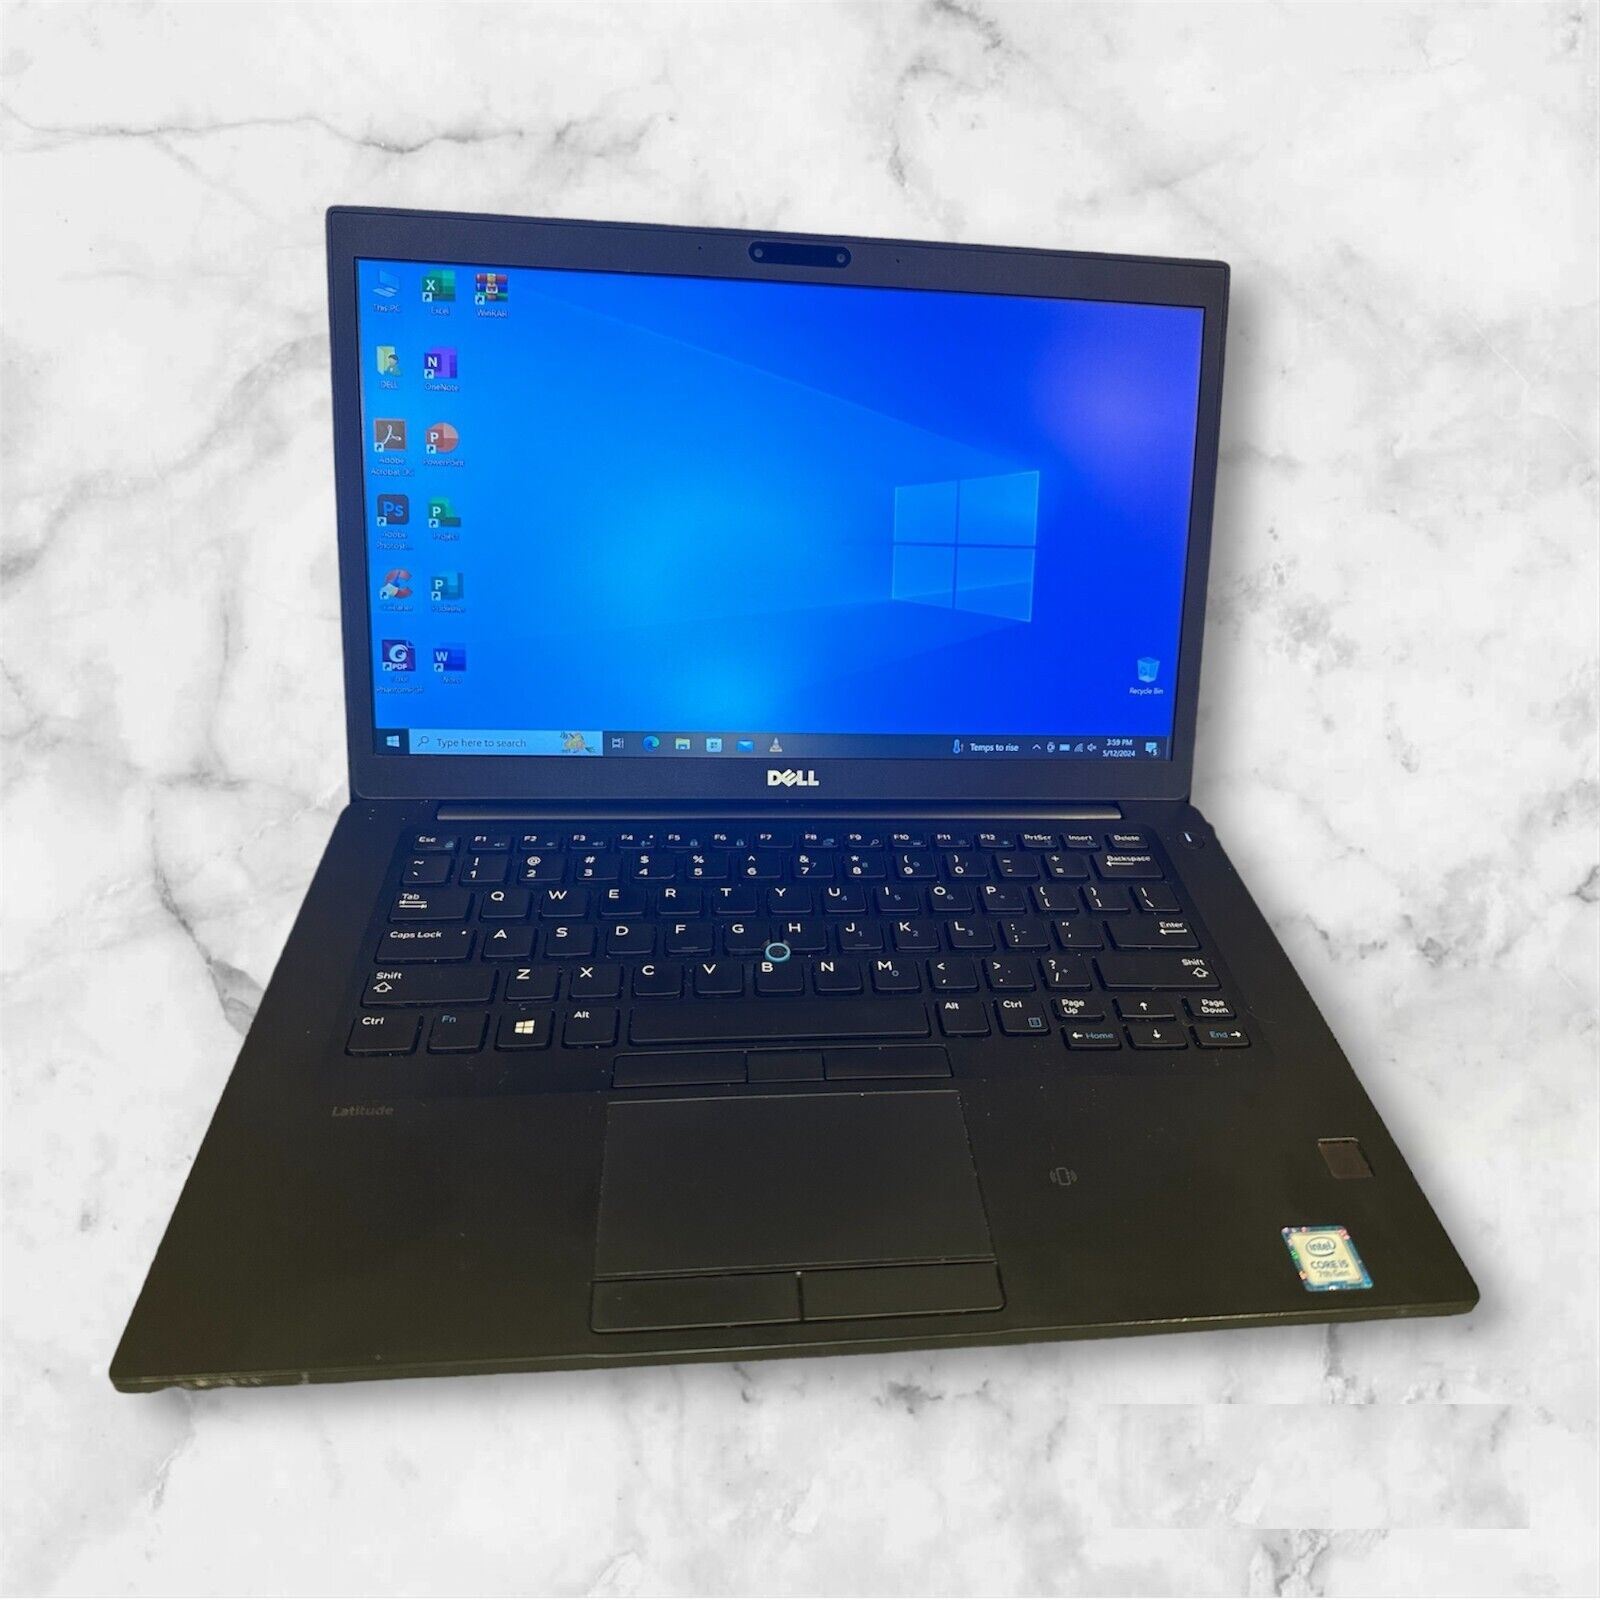  Dell Laptop Valued at $2400 for an Unbeatable 80% Off – Limited Time Offer